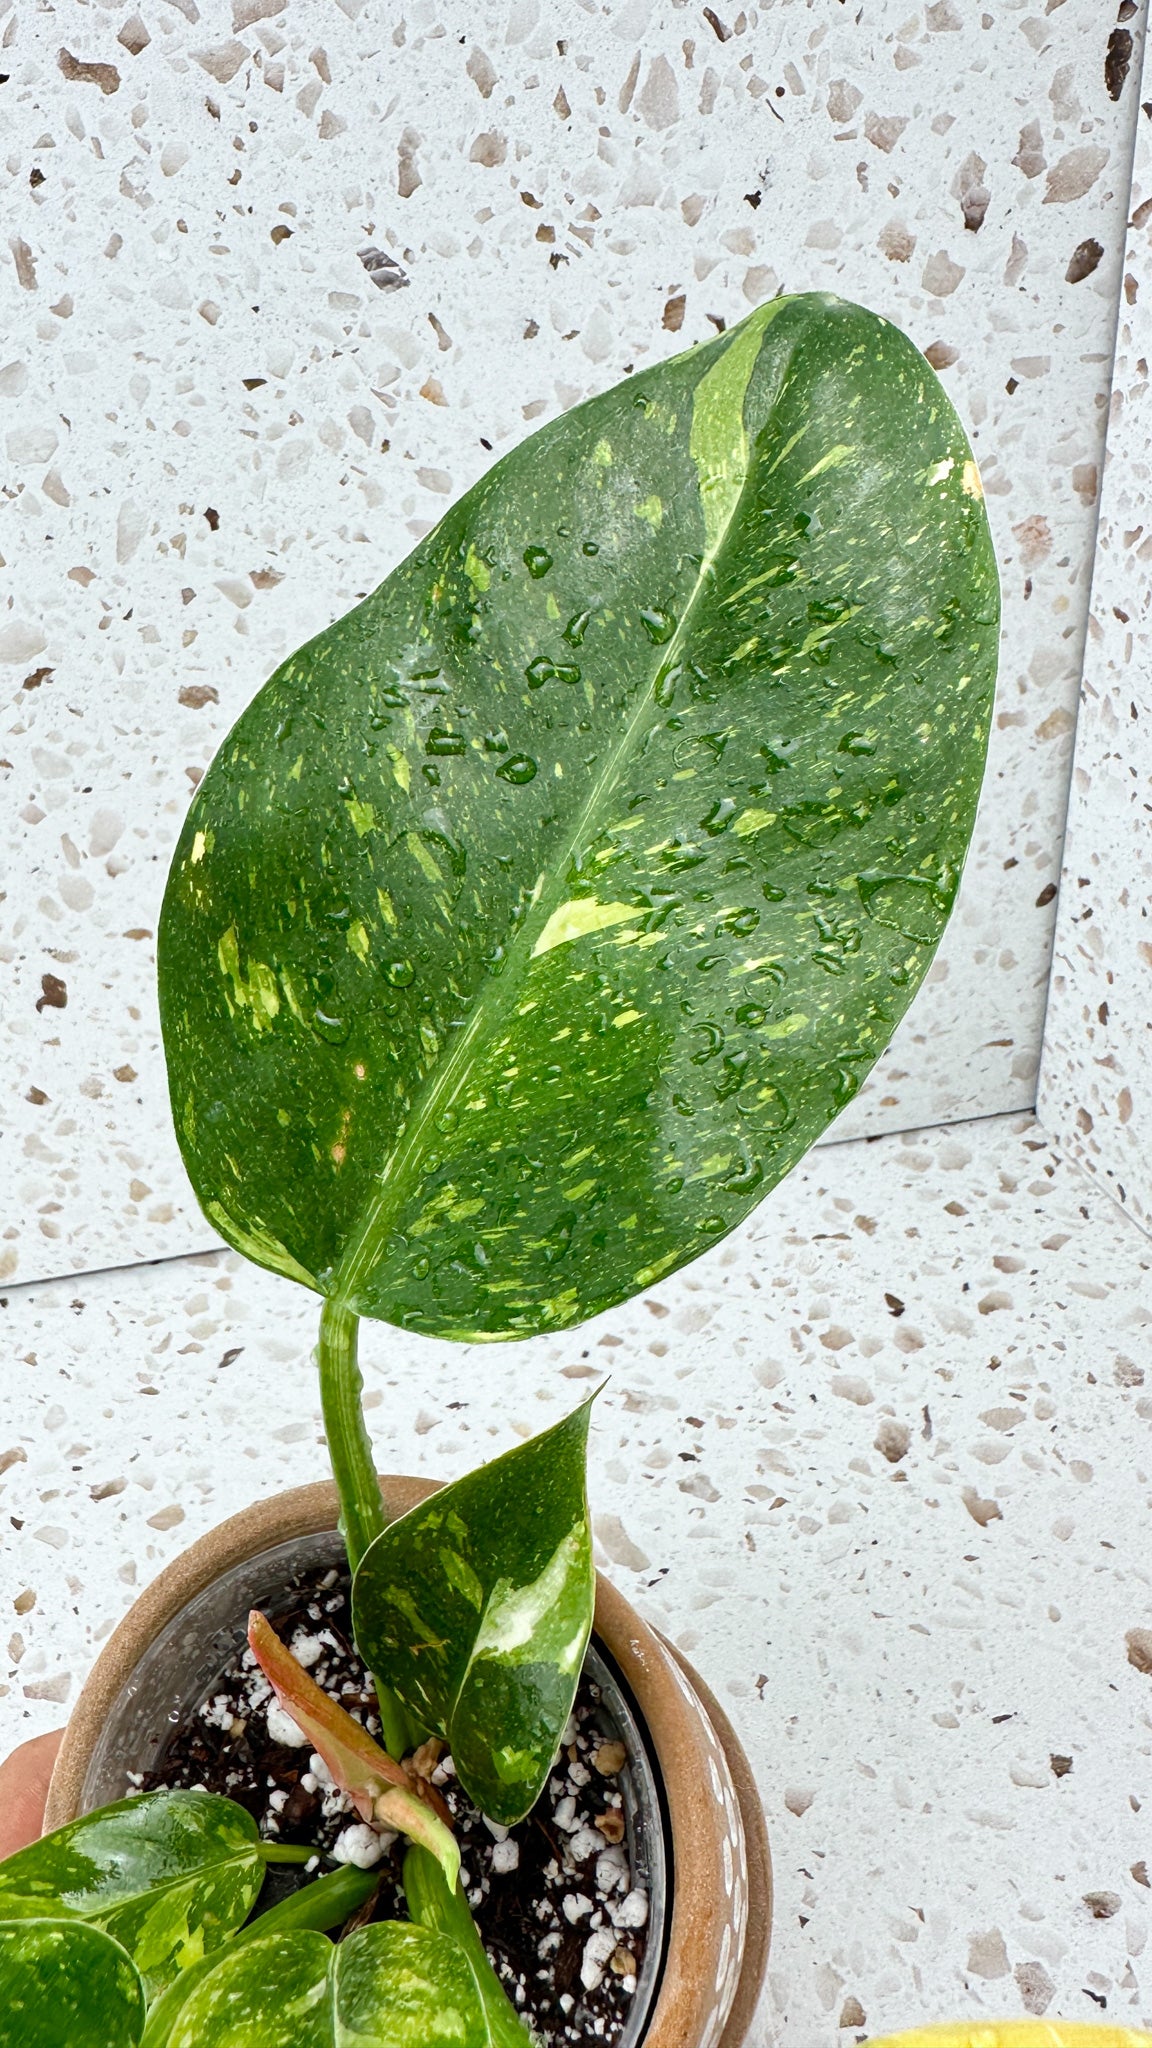 Philodendron Green Congo marble variegated